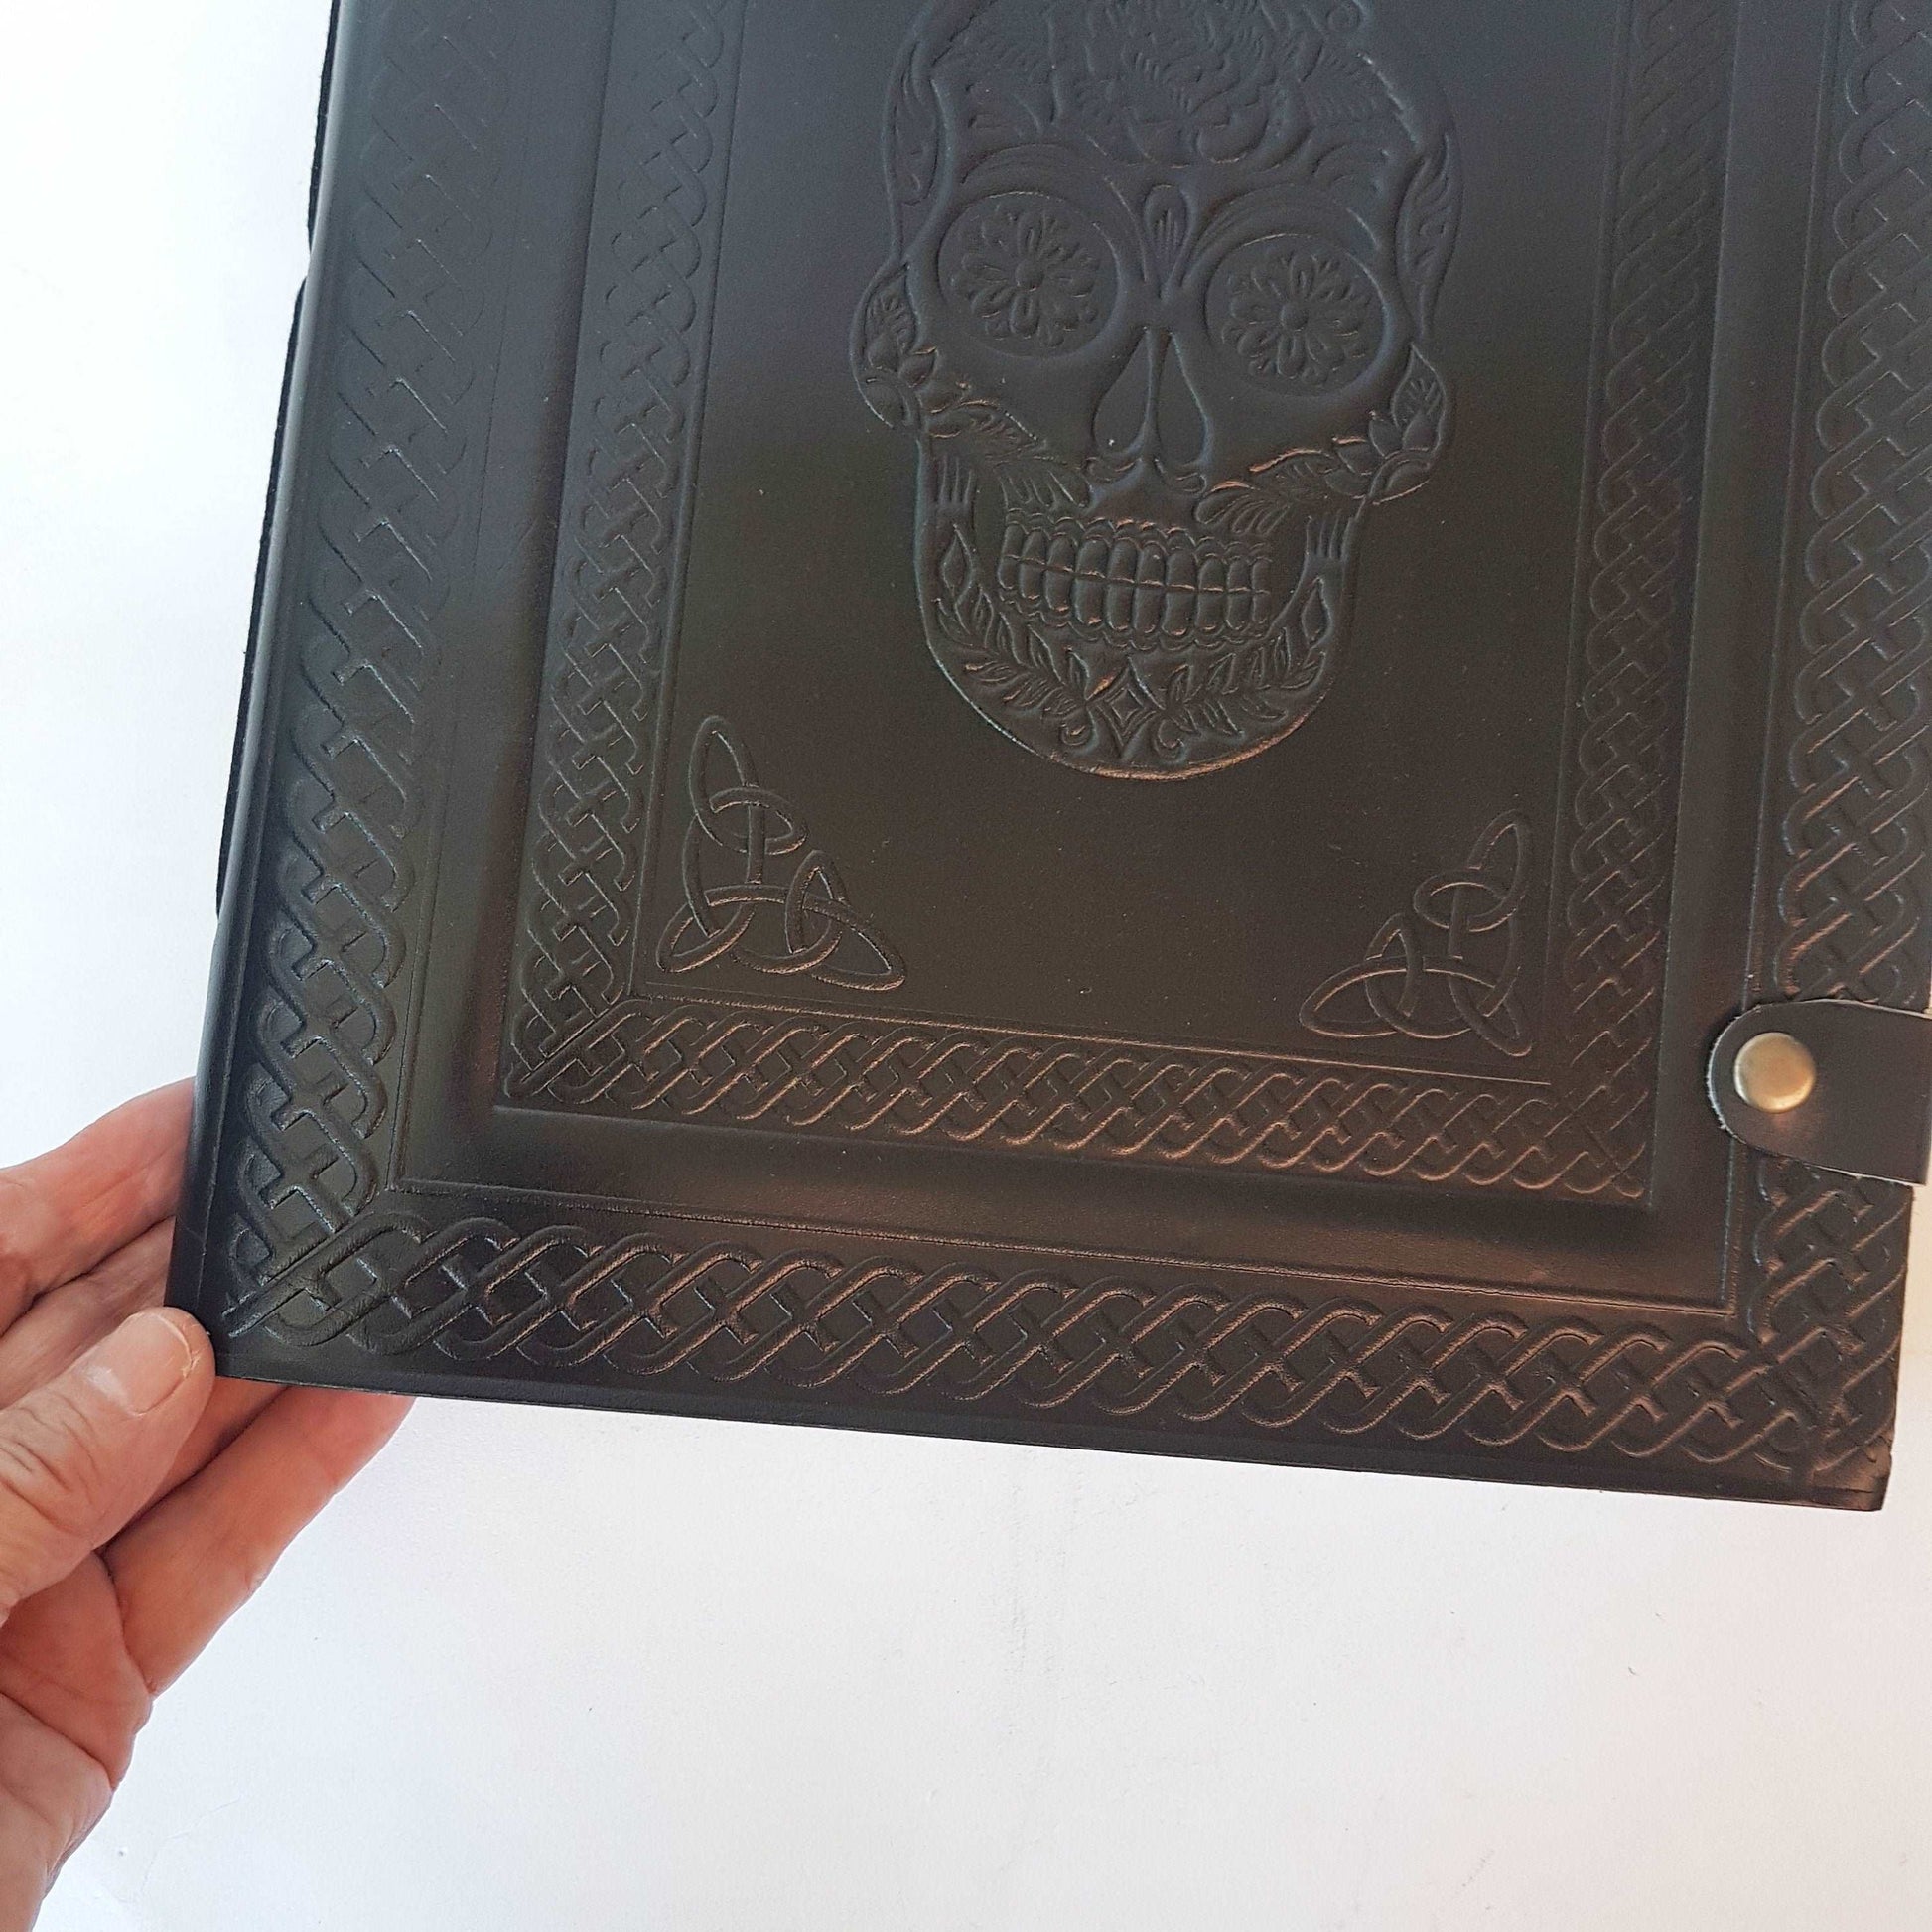 Black leather skull journal. Large album with blank pages. Use as sketchbook, diary, book of shadows. Halloween-wiccan-pagan theme gift. - Vintage India Ca